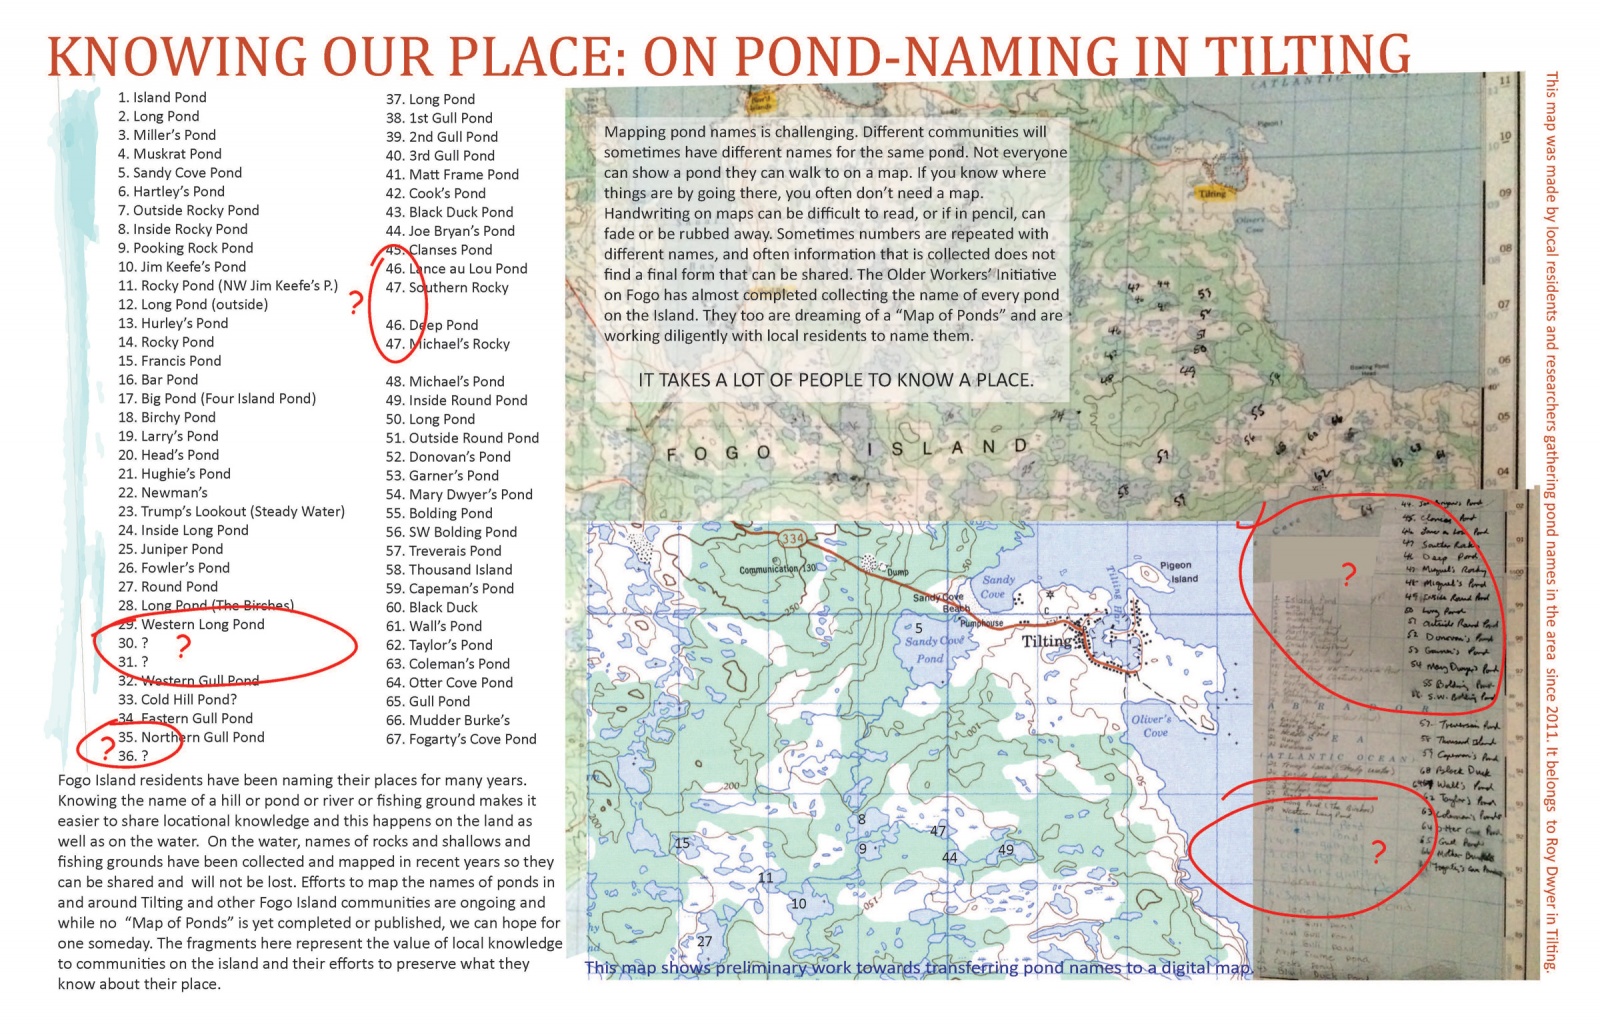 Knowing Our Place: On Pond-Naming in Tilting